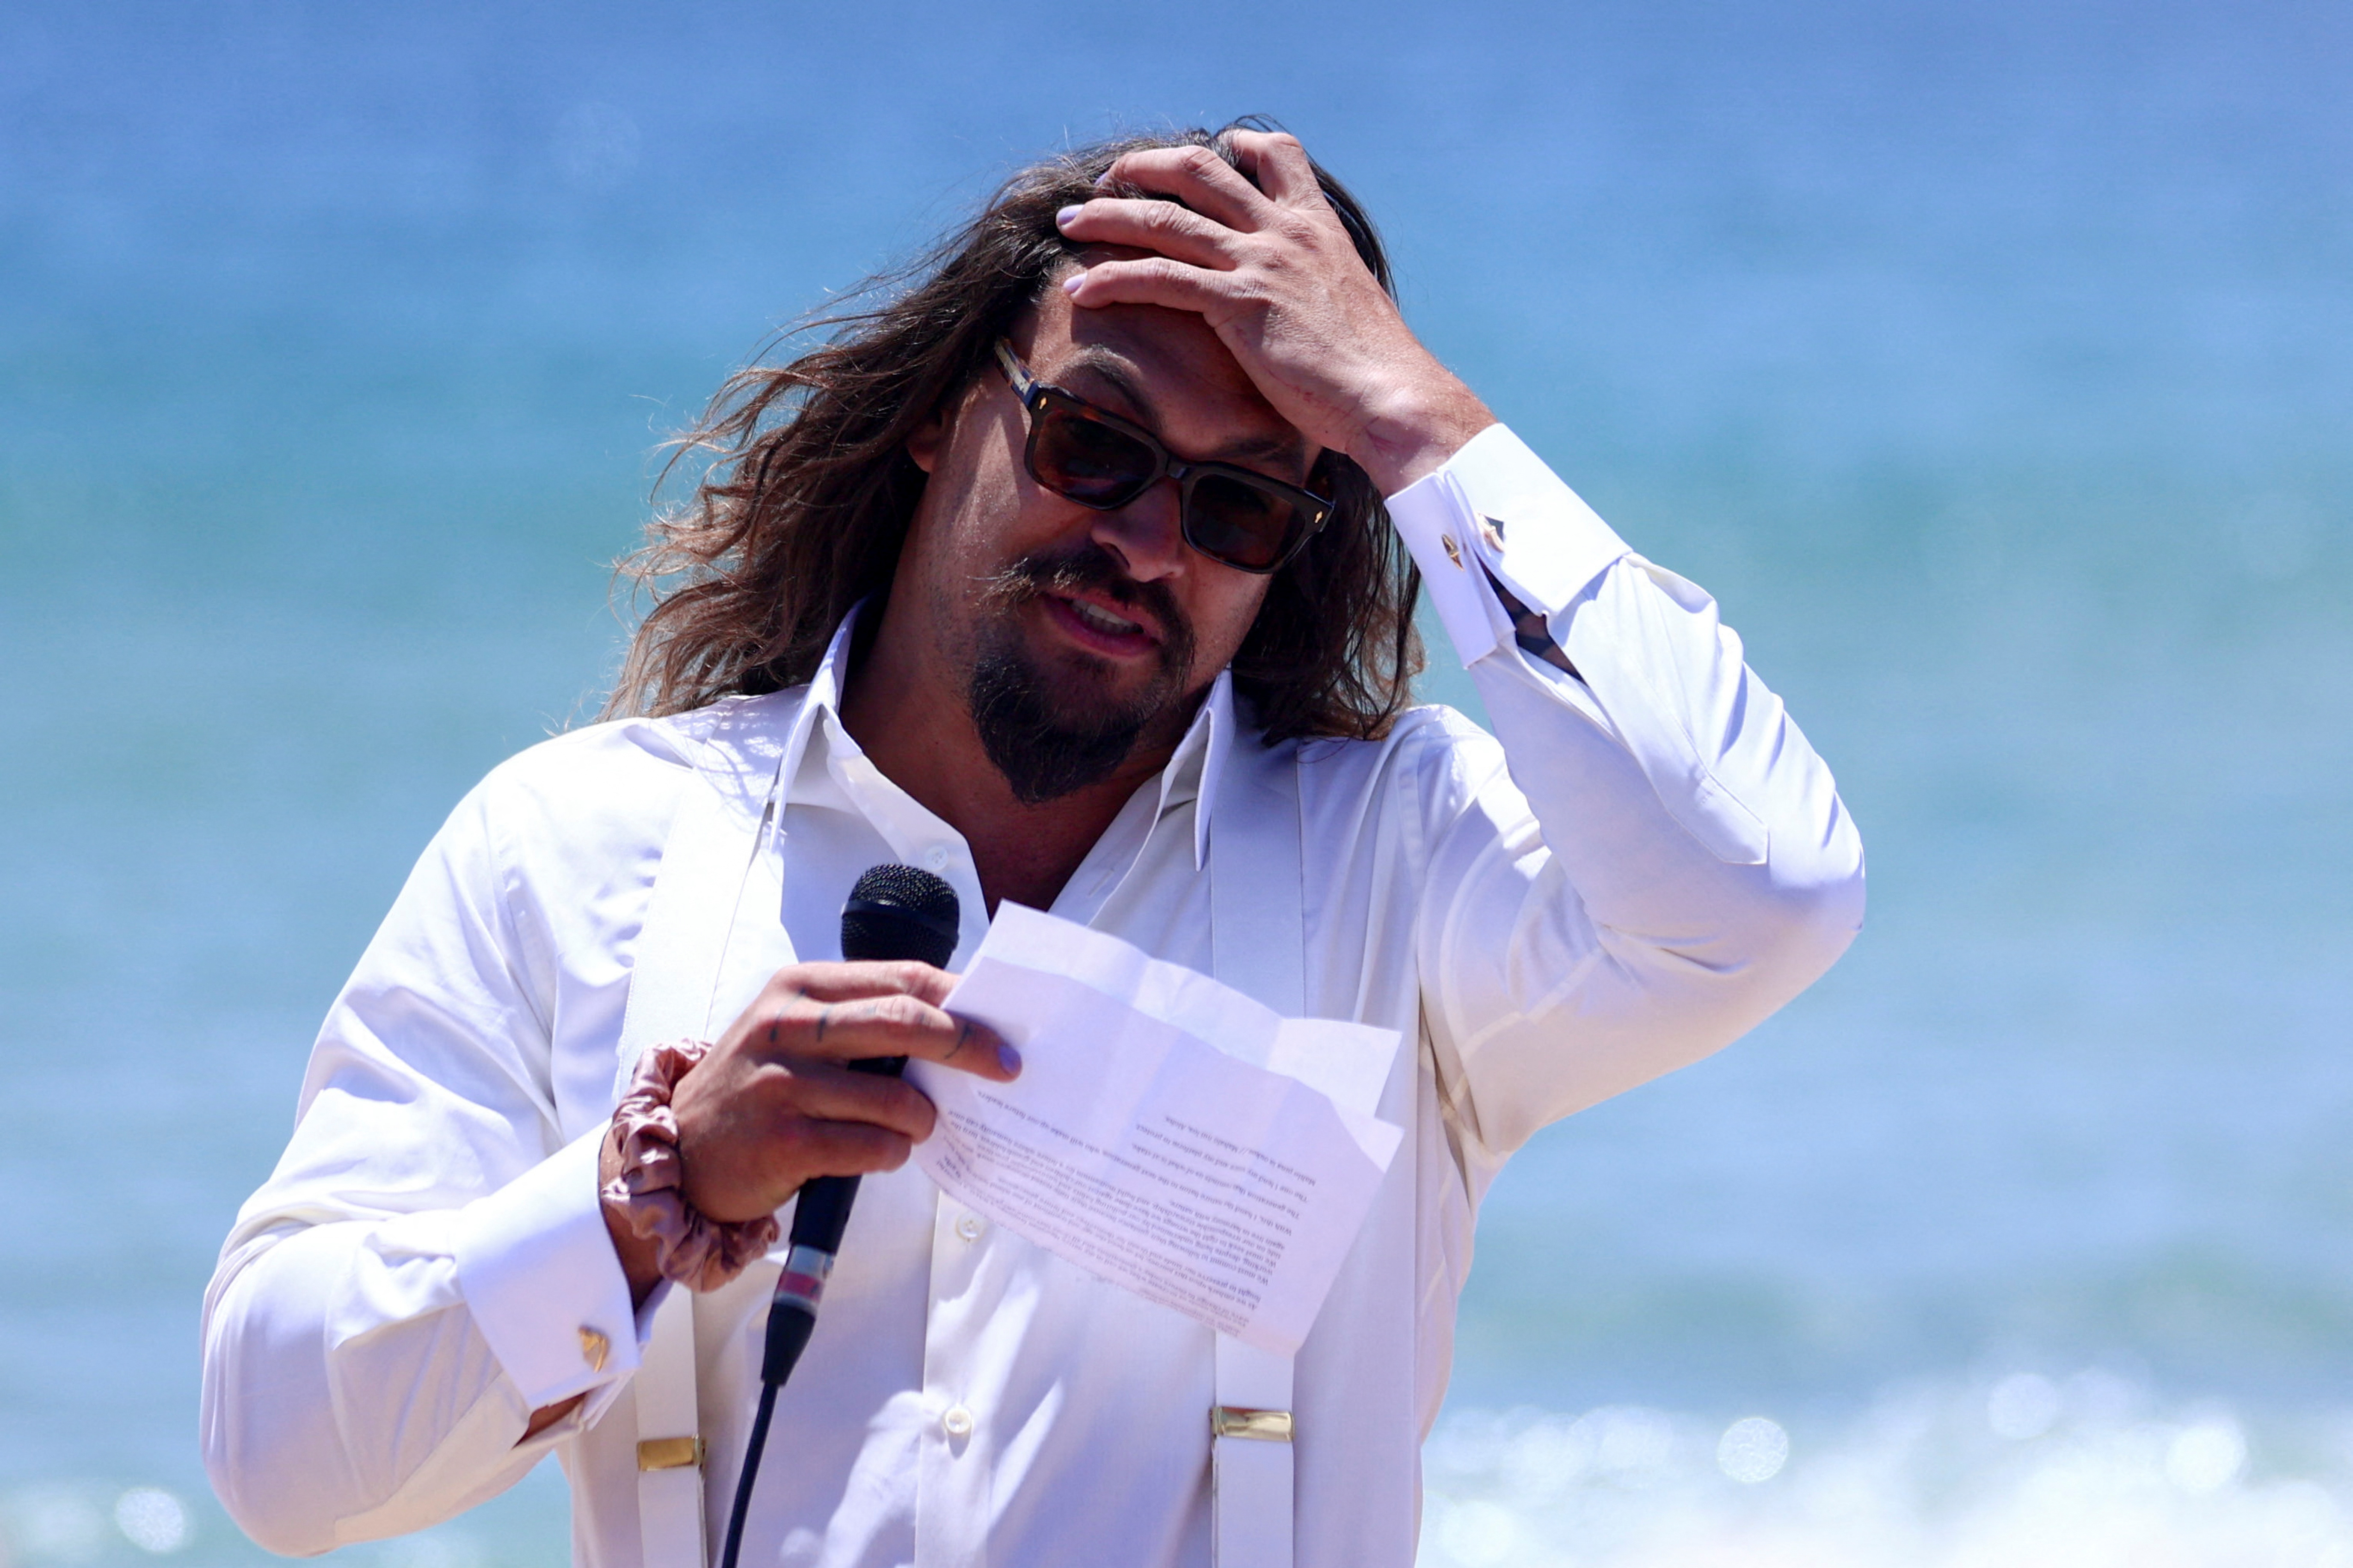 American actor and environmental activist Jason Momoa makes an appearance at a Portuguese Carcavelos beach ahead of the United Nations Ocean Conference in Lisbon